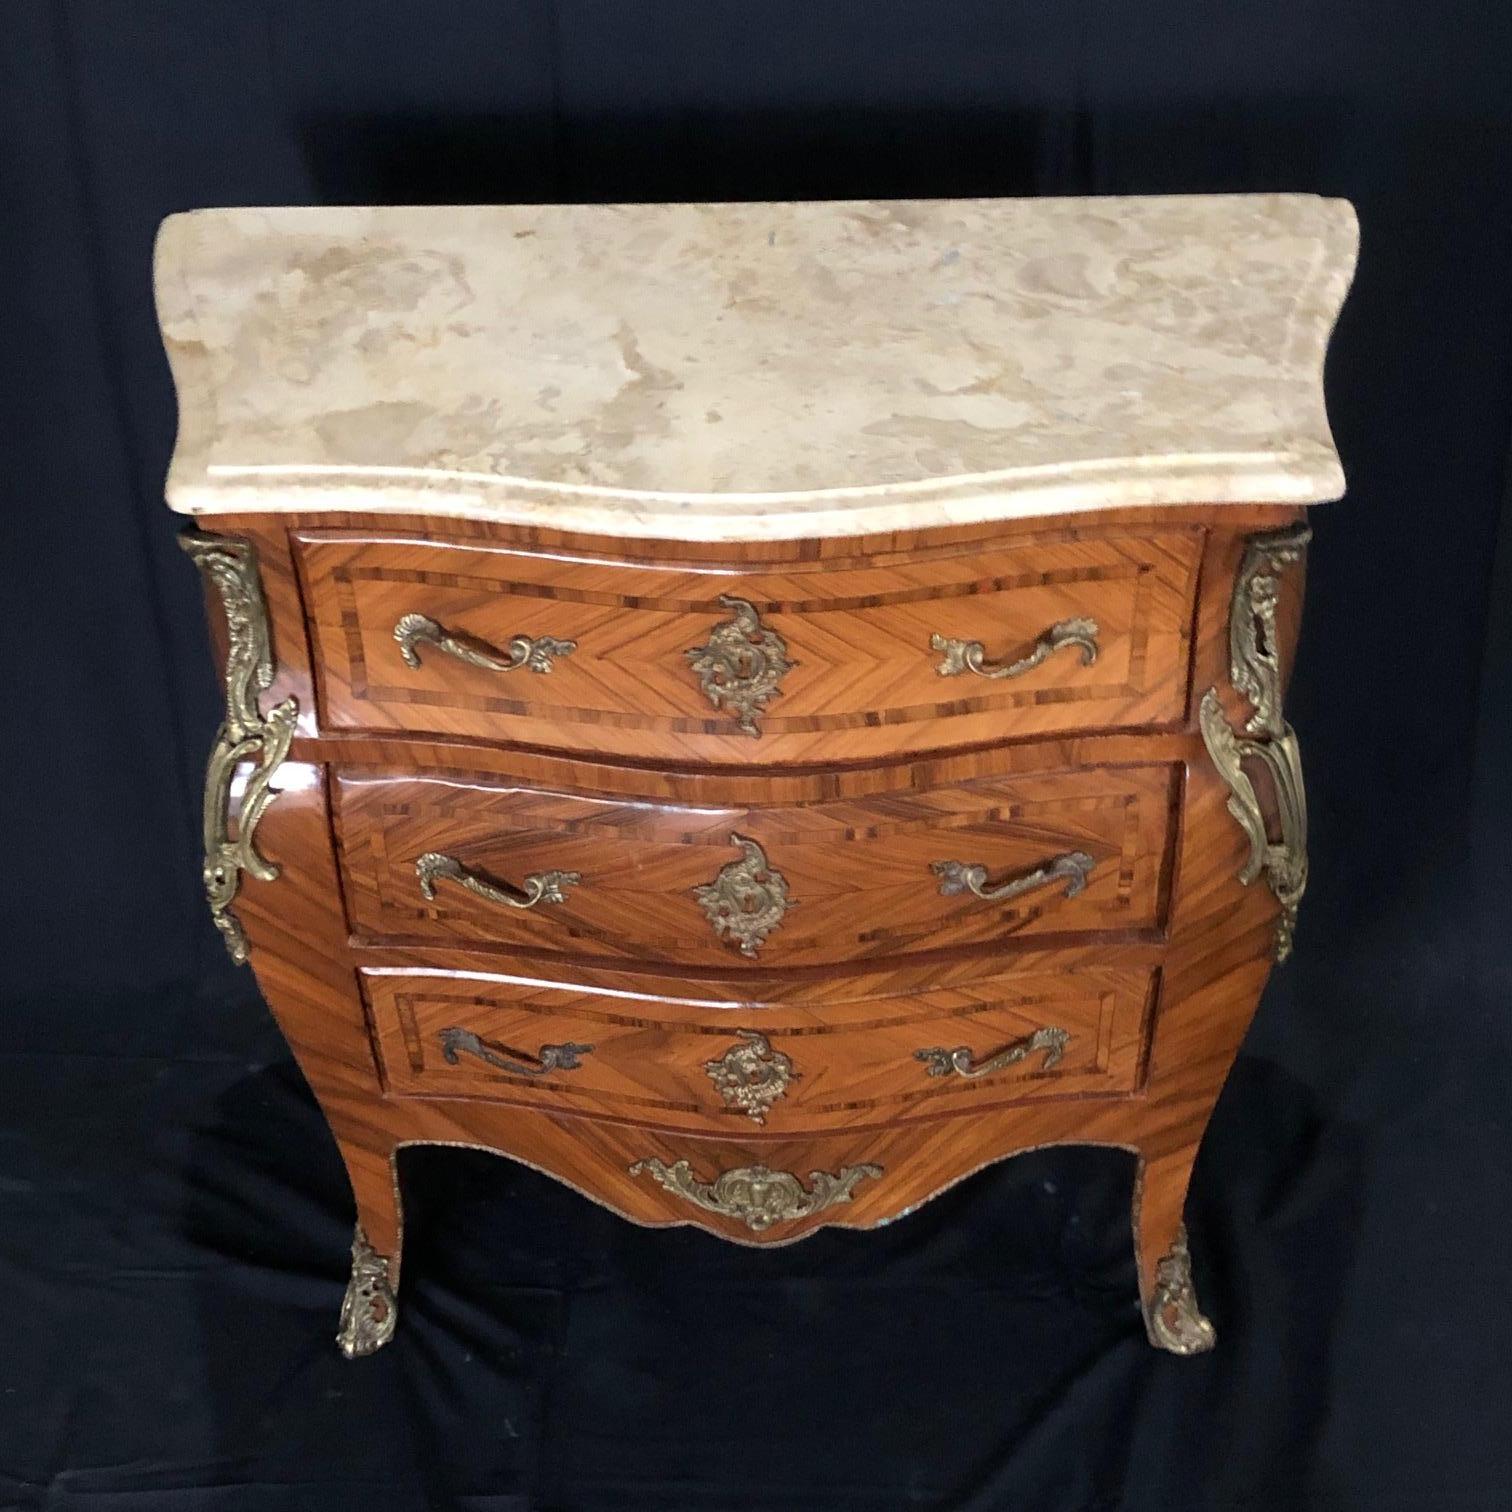 Petite Louis XV style marble top chest or commode having beautiful banded herringbone marquetry serpentine shaped front with three drawers and decorative gold bronze mounts. The lovely cream and ivory Italian marble has corners beveled with curves